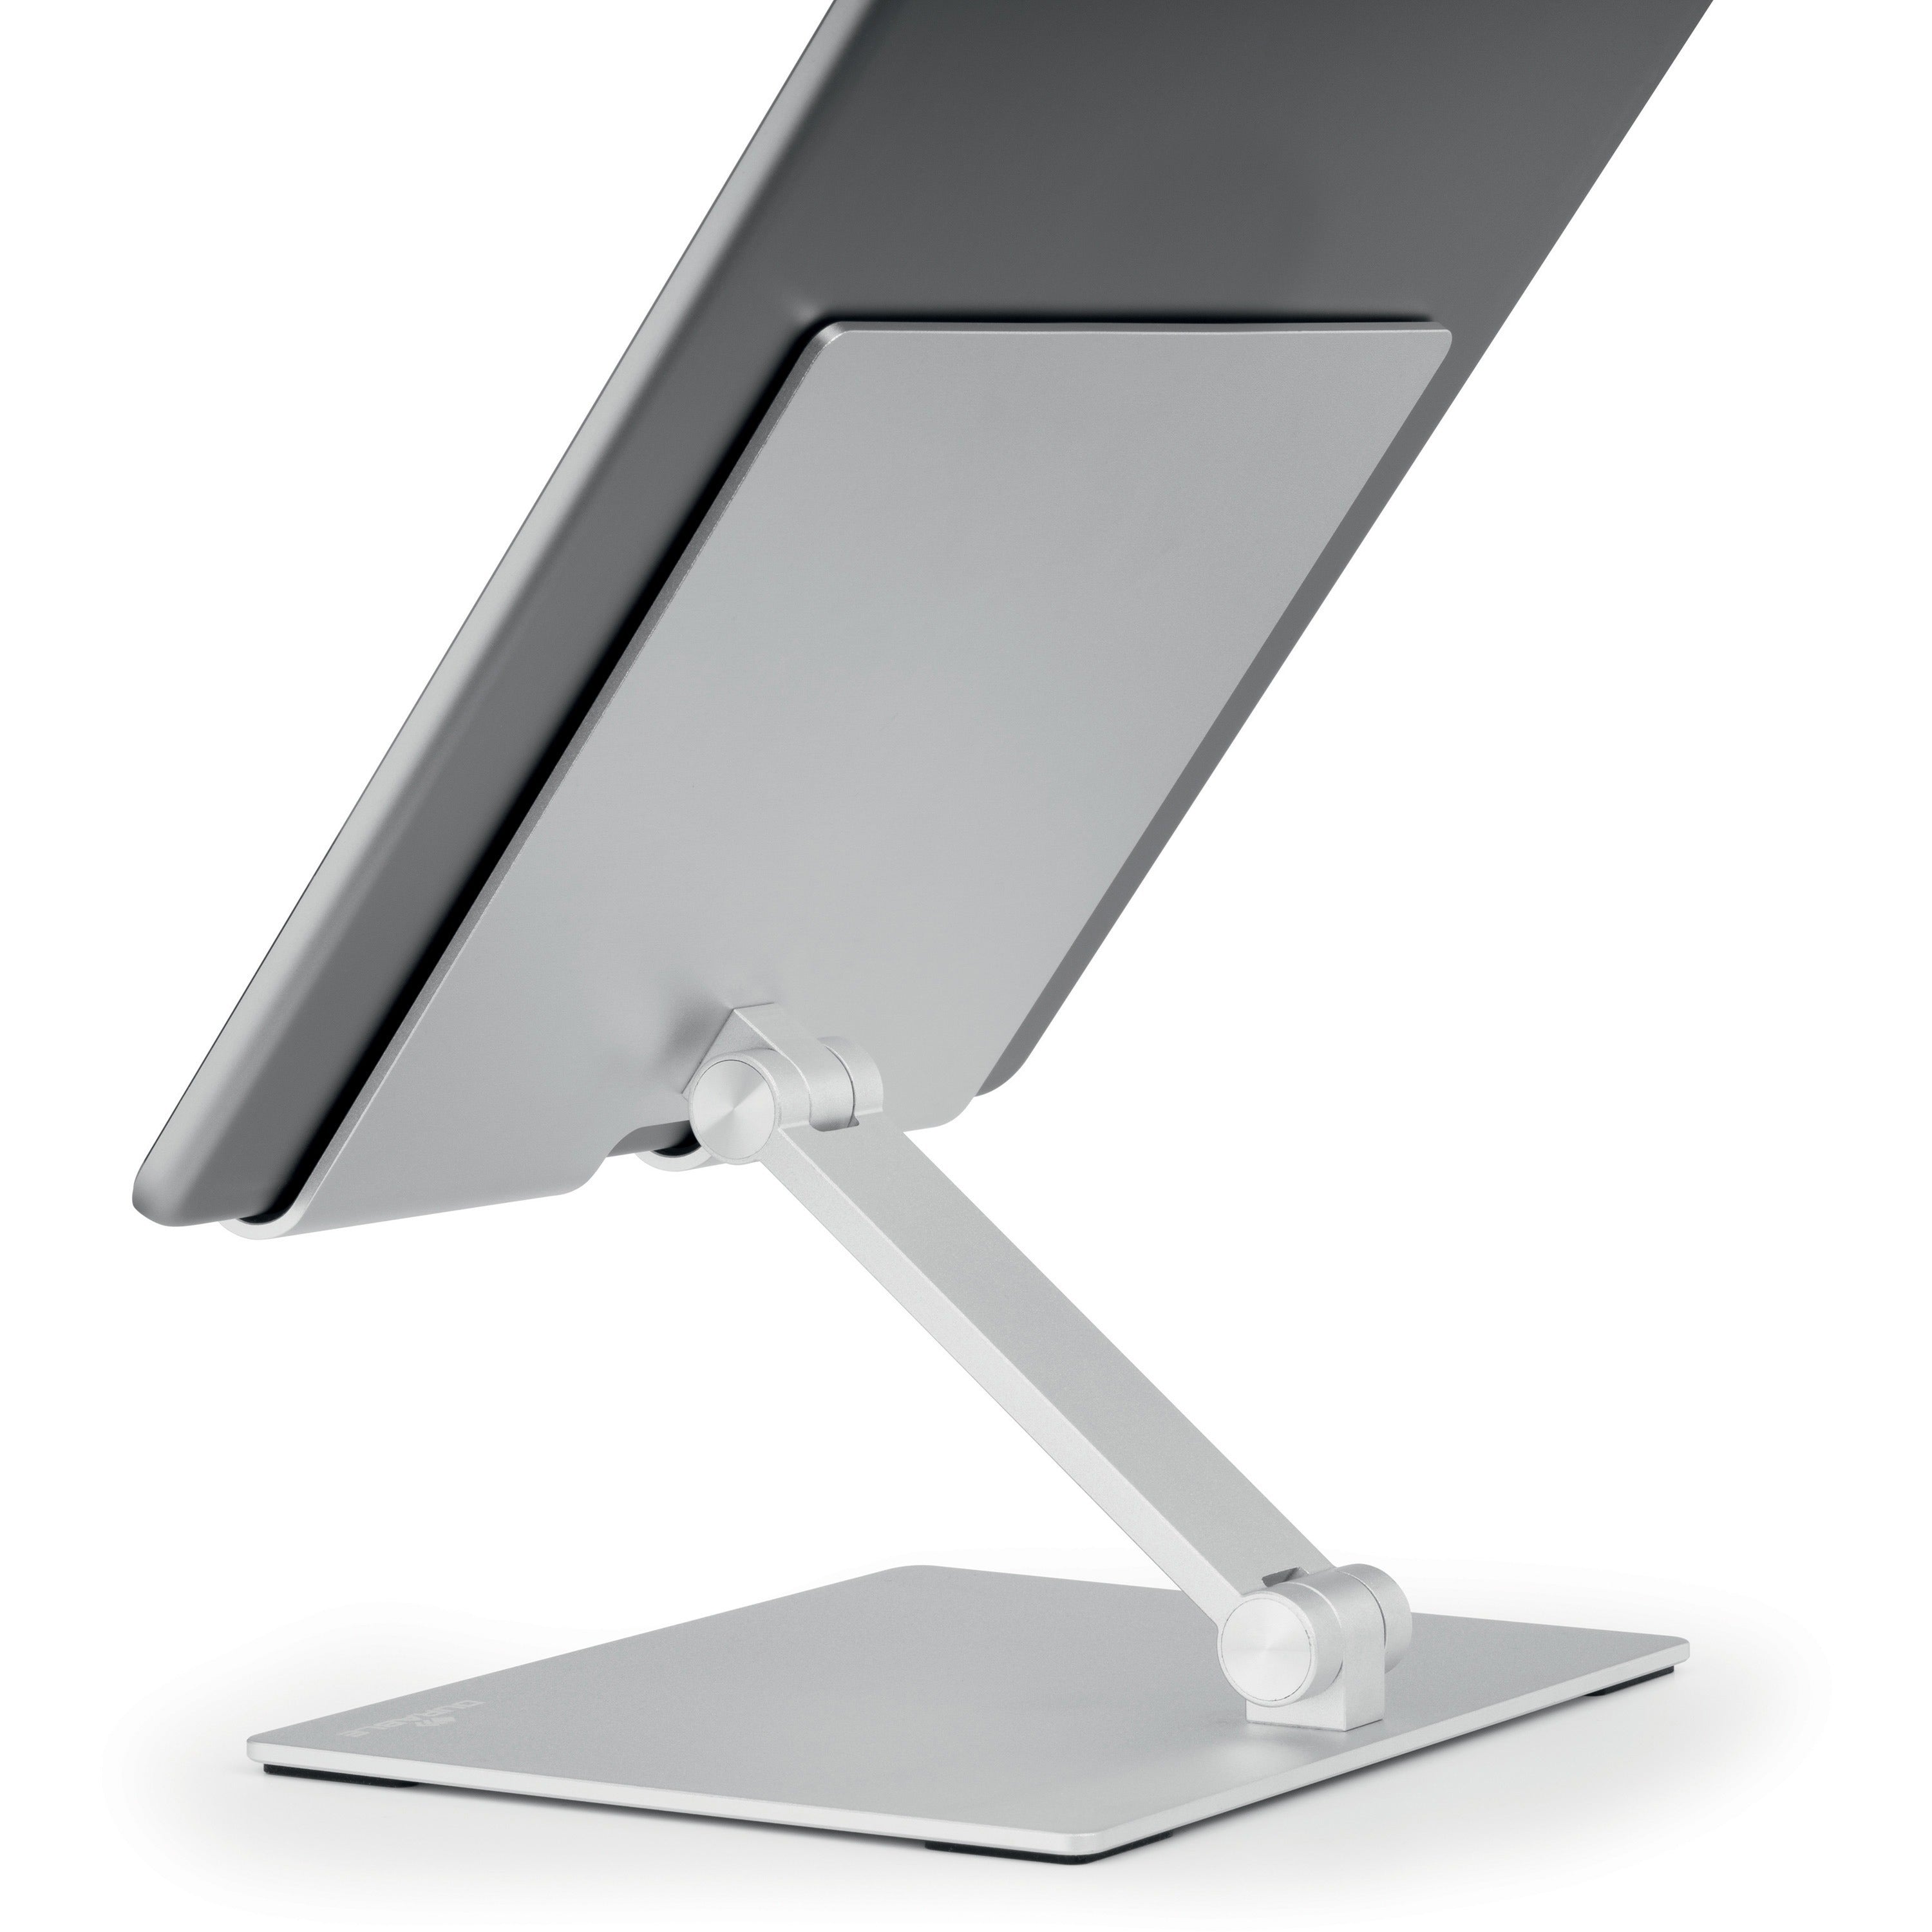 durable-rise-tablet-stand-up-to-13-screen-support-220-lb-load-capacity-81-height-x-67-width-x-54-depth-tabletop-aluminum-silver_dbl894023 - 4